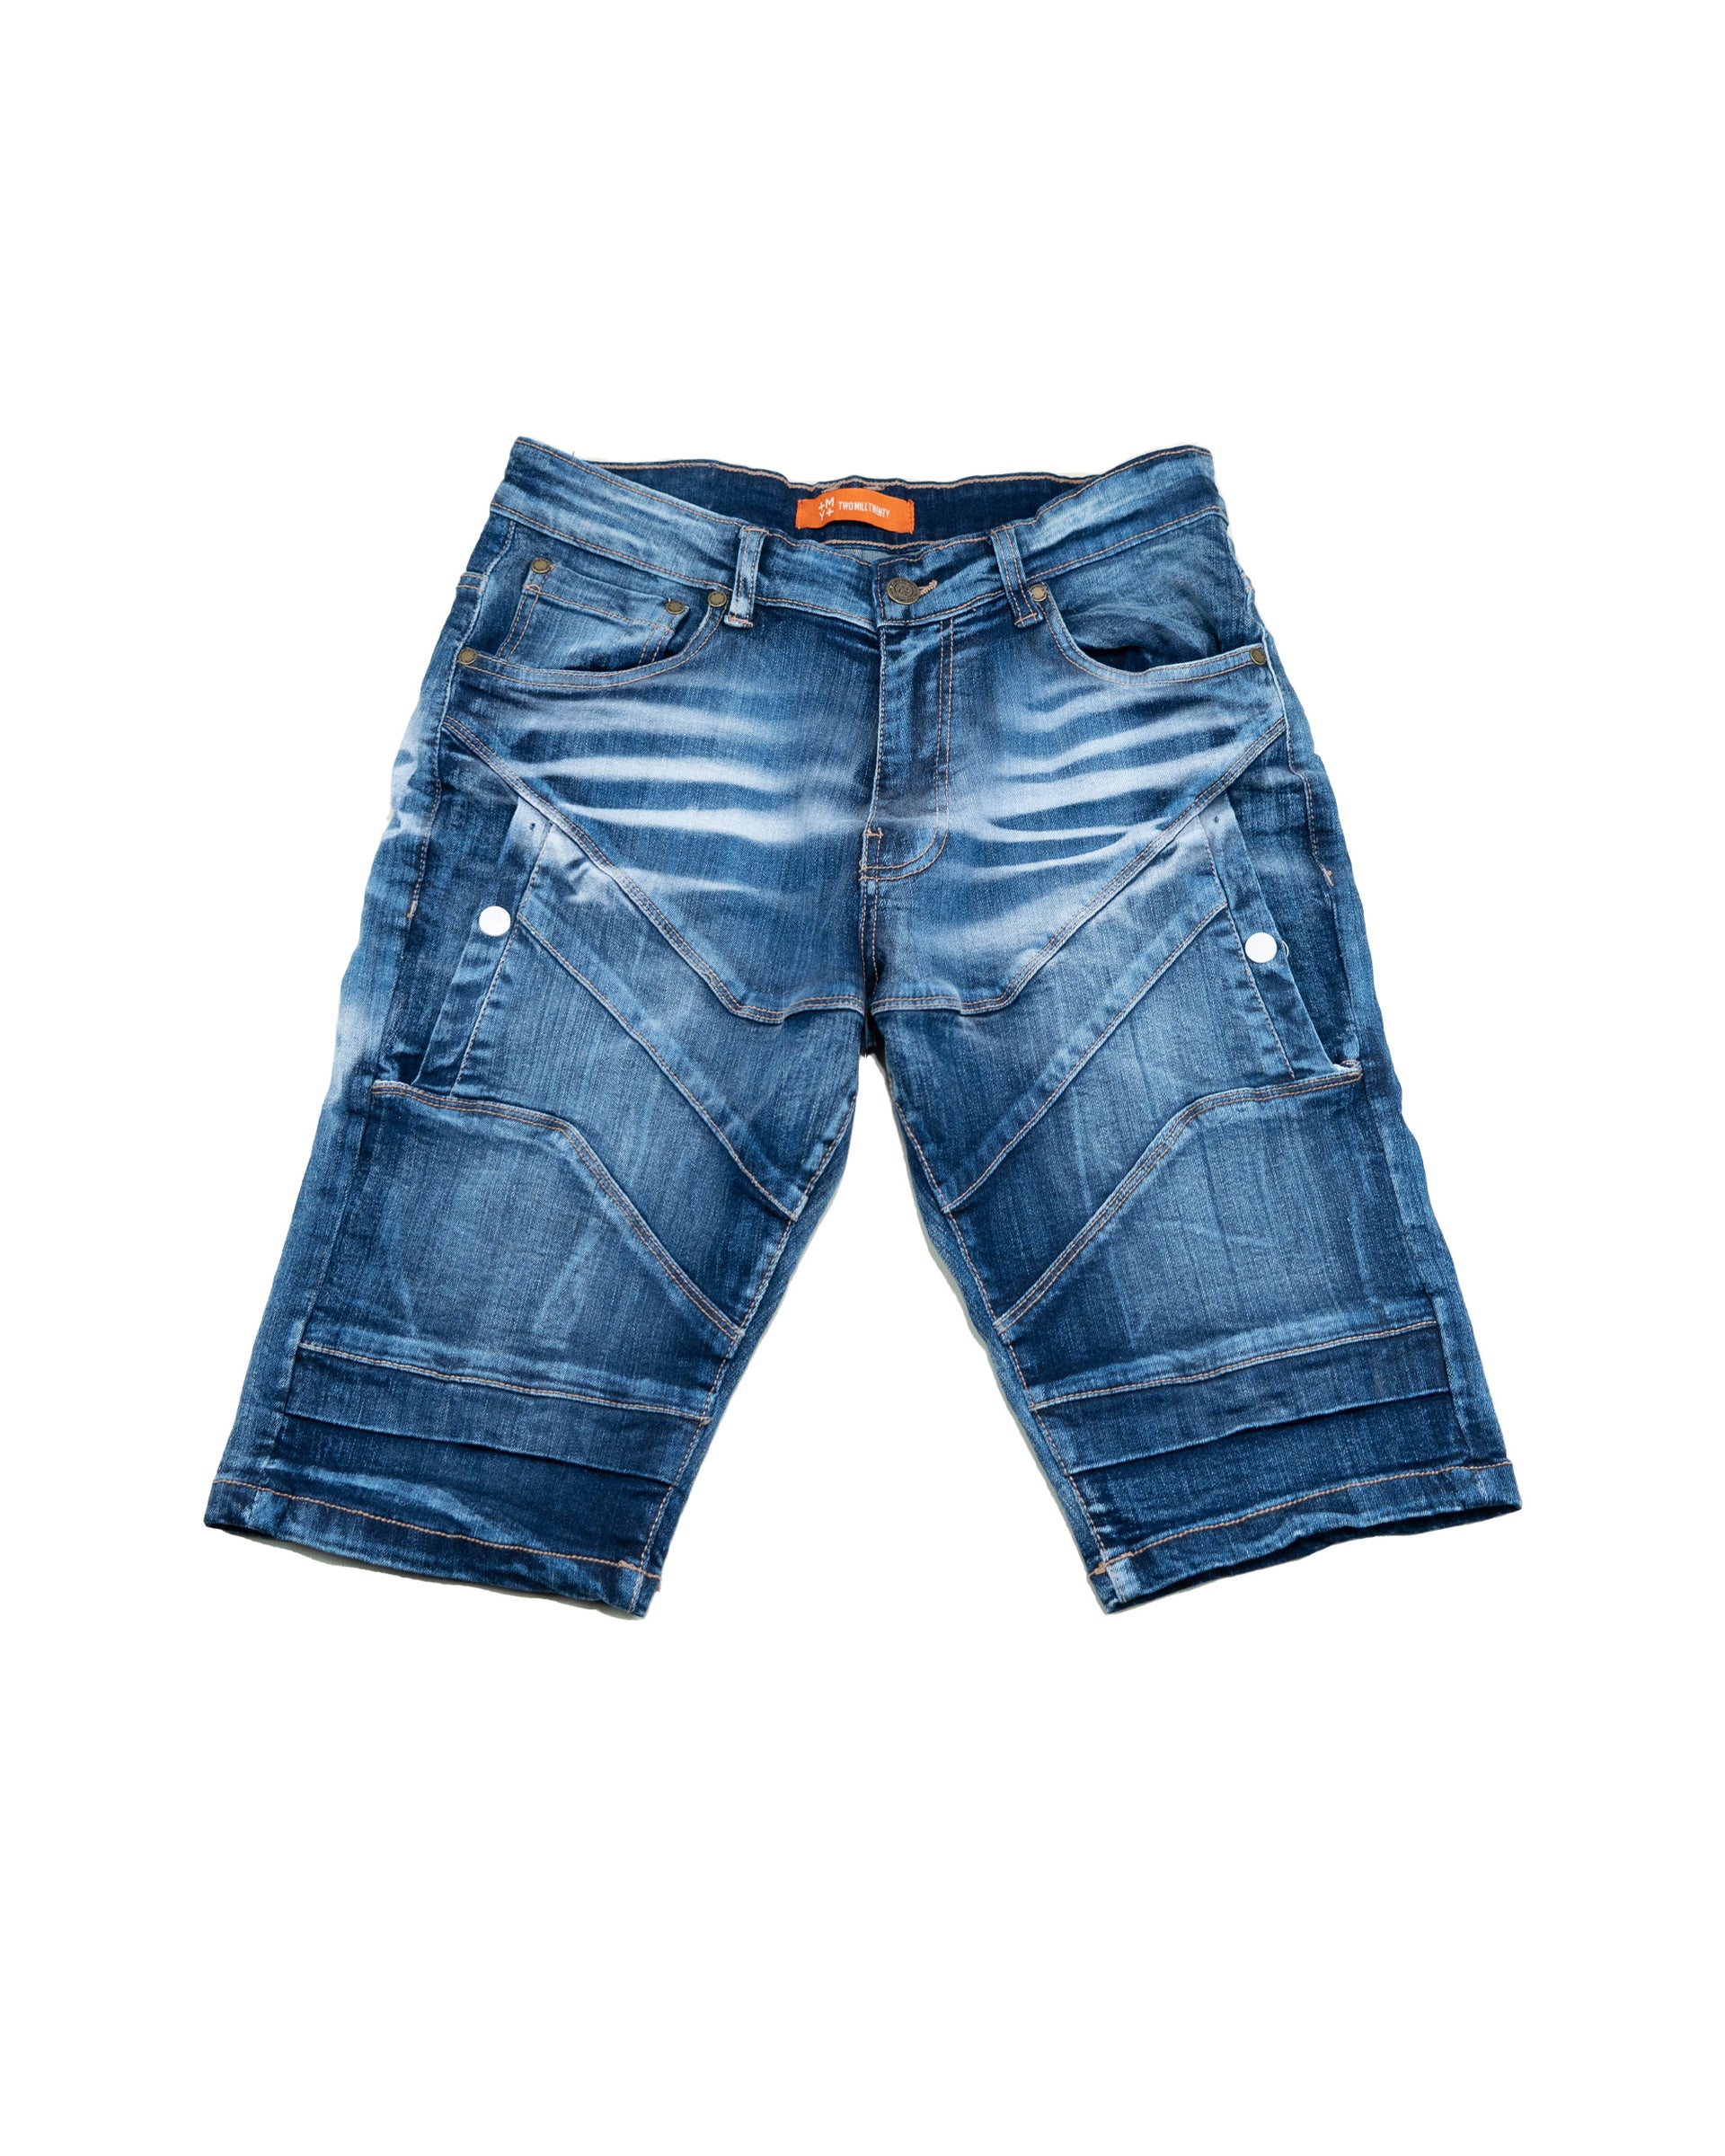 HARRISON | Men's Classic Fit Carpenter Style Distressed Denim Jean Shorts in Blue Ink Stain